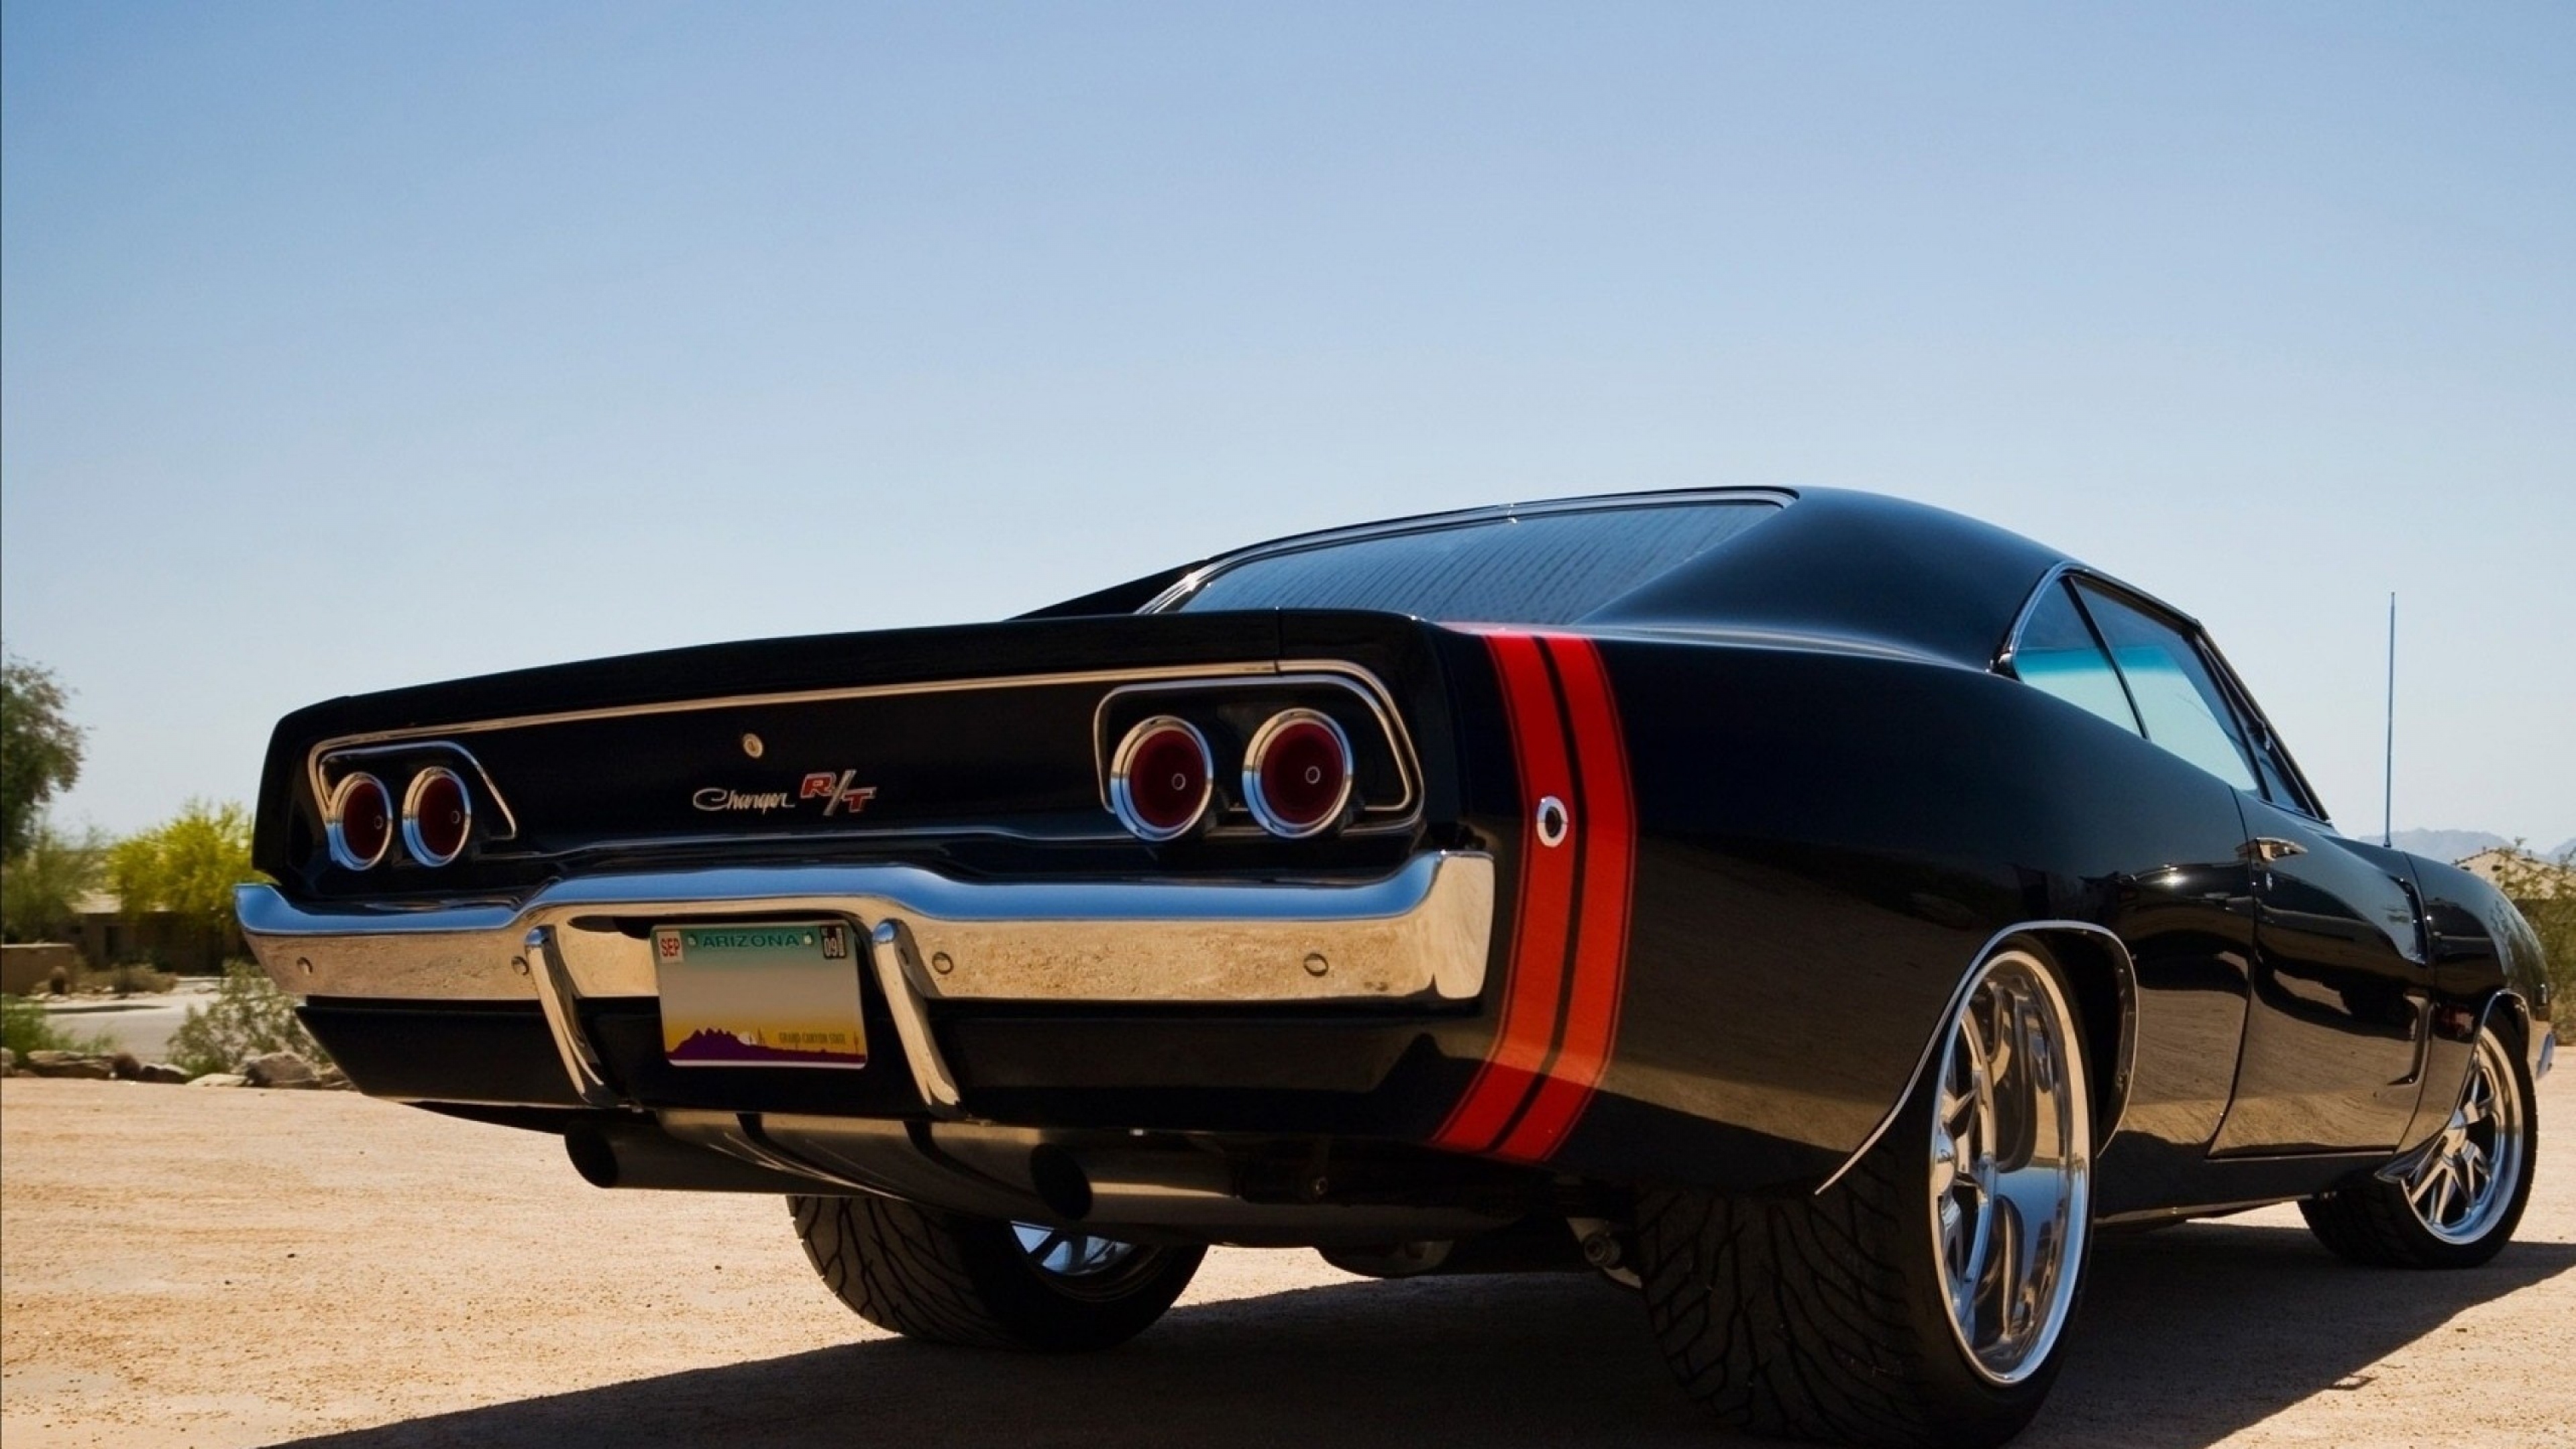 Wallpaper 3840x2160 Muscle cars Dodge Dodge charger Car Stylish 4K